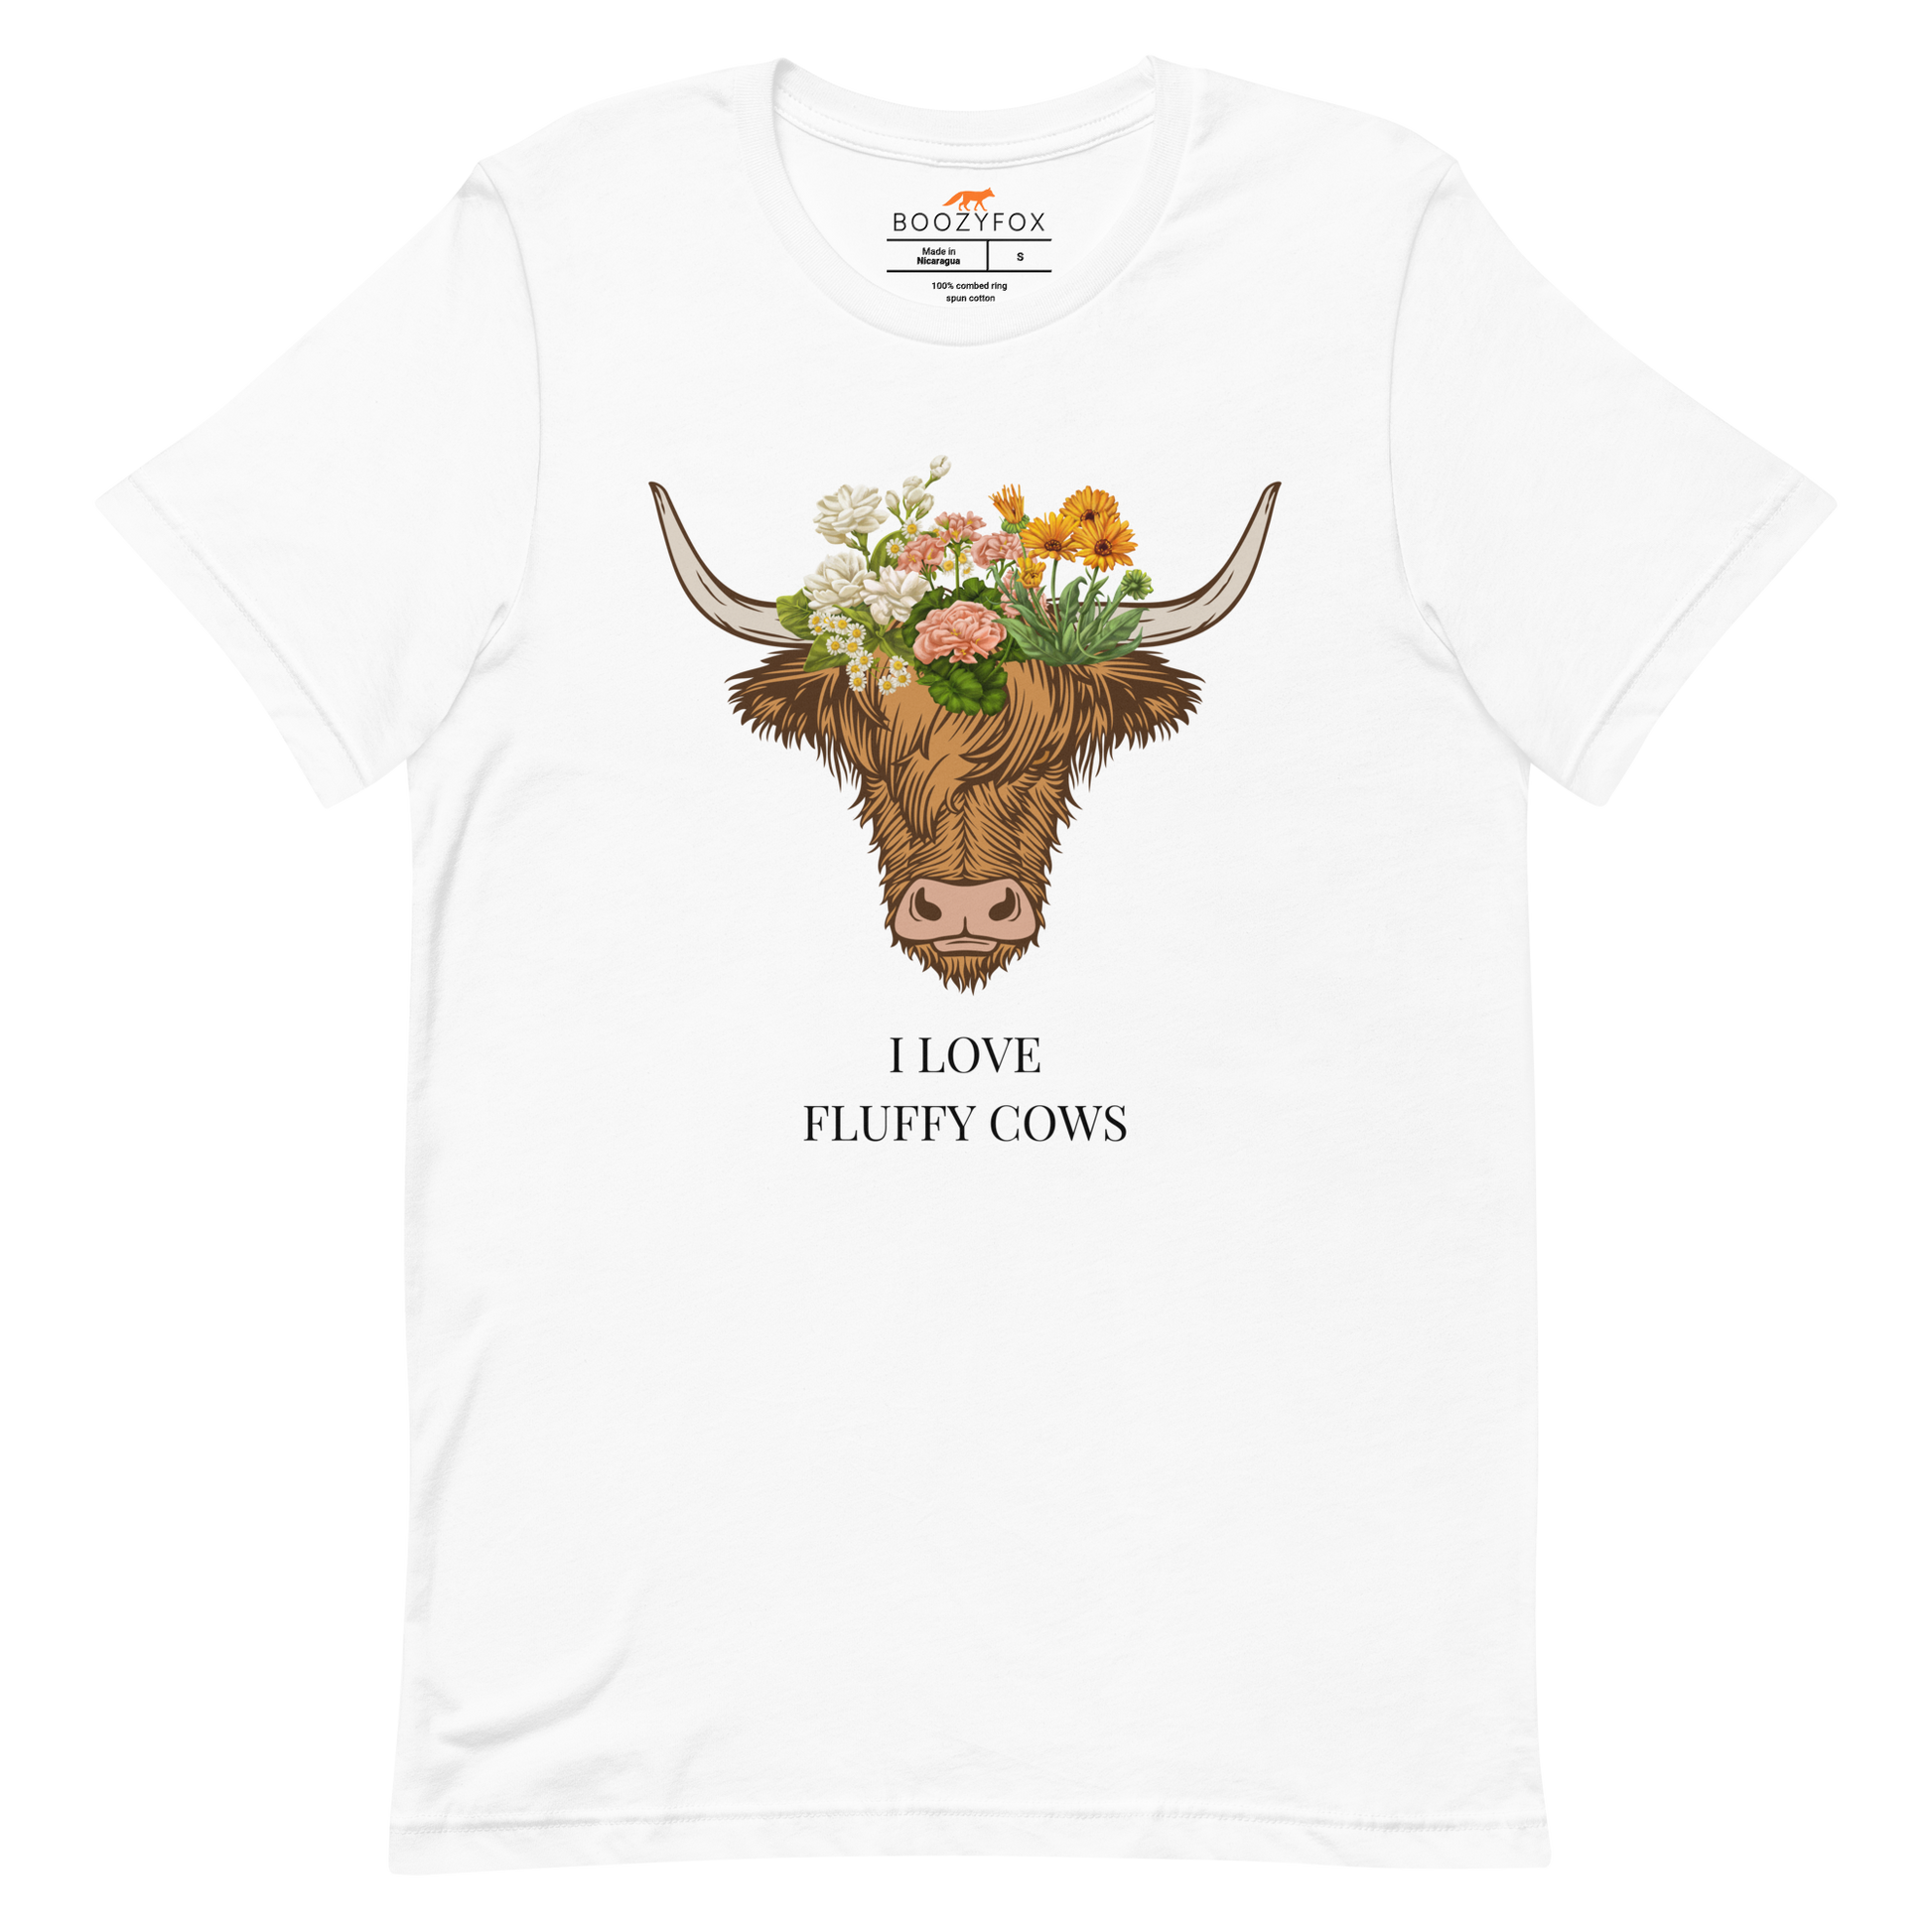 White Premium Highland Cow Tee featuring an adorable I Love Fluffy Cows graphic on the chest - Cute Graphic Highland Cow Tees - Boozy Fox